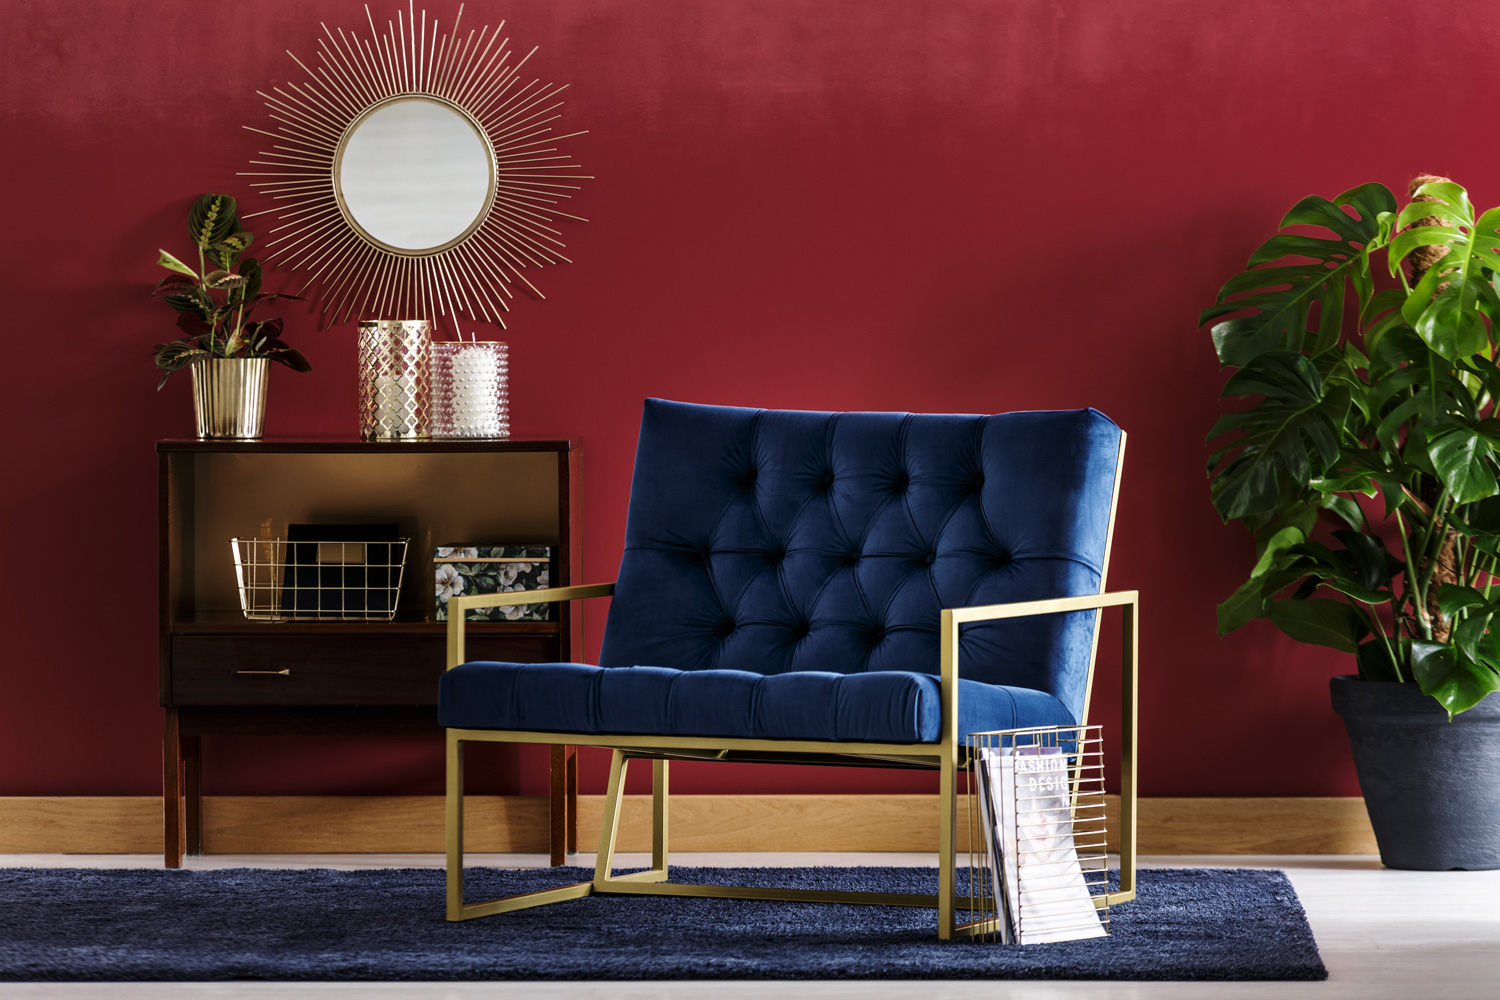 Navy blue armchair with golden frame standing in burgundy room with wooden cupboard and Monstera Deliciosa